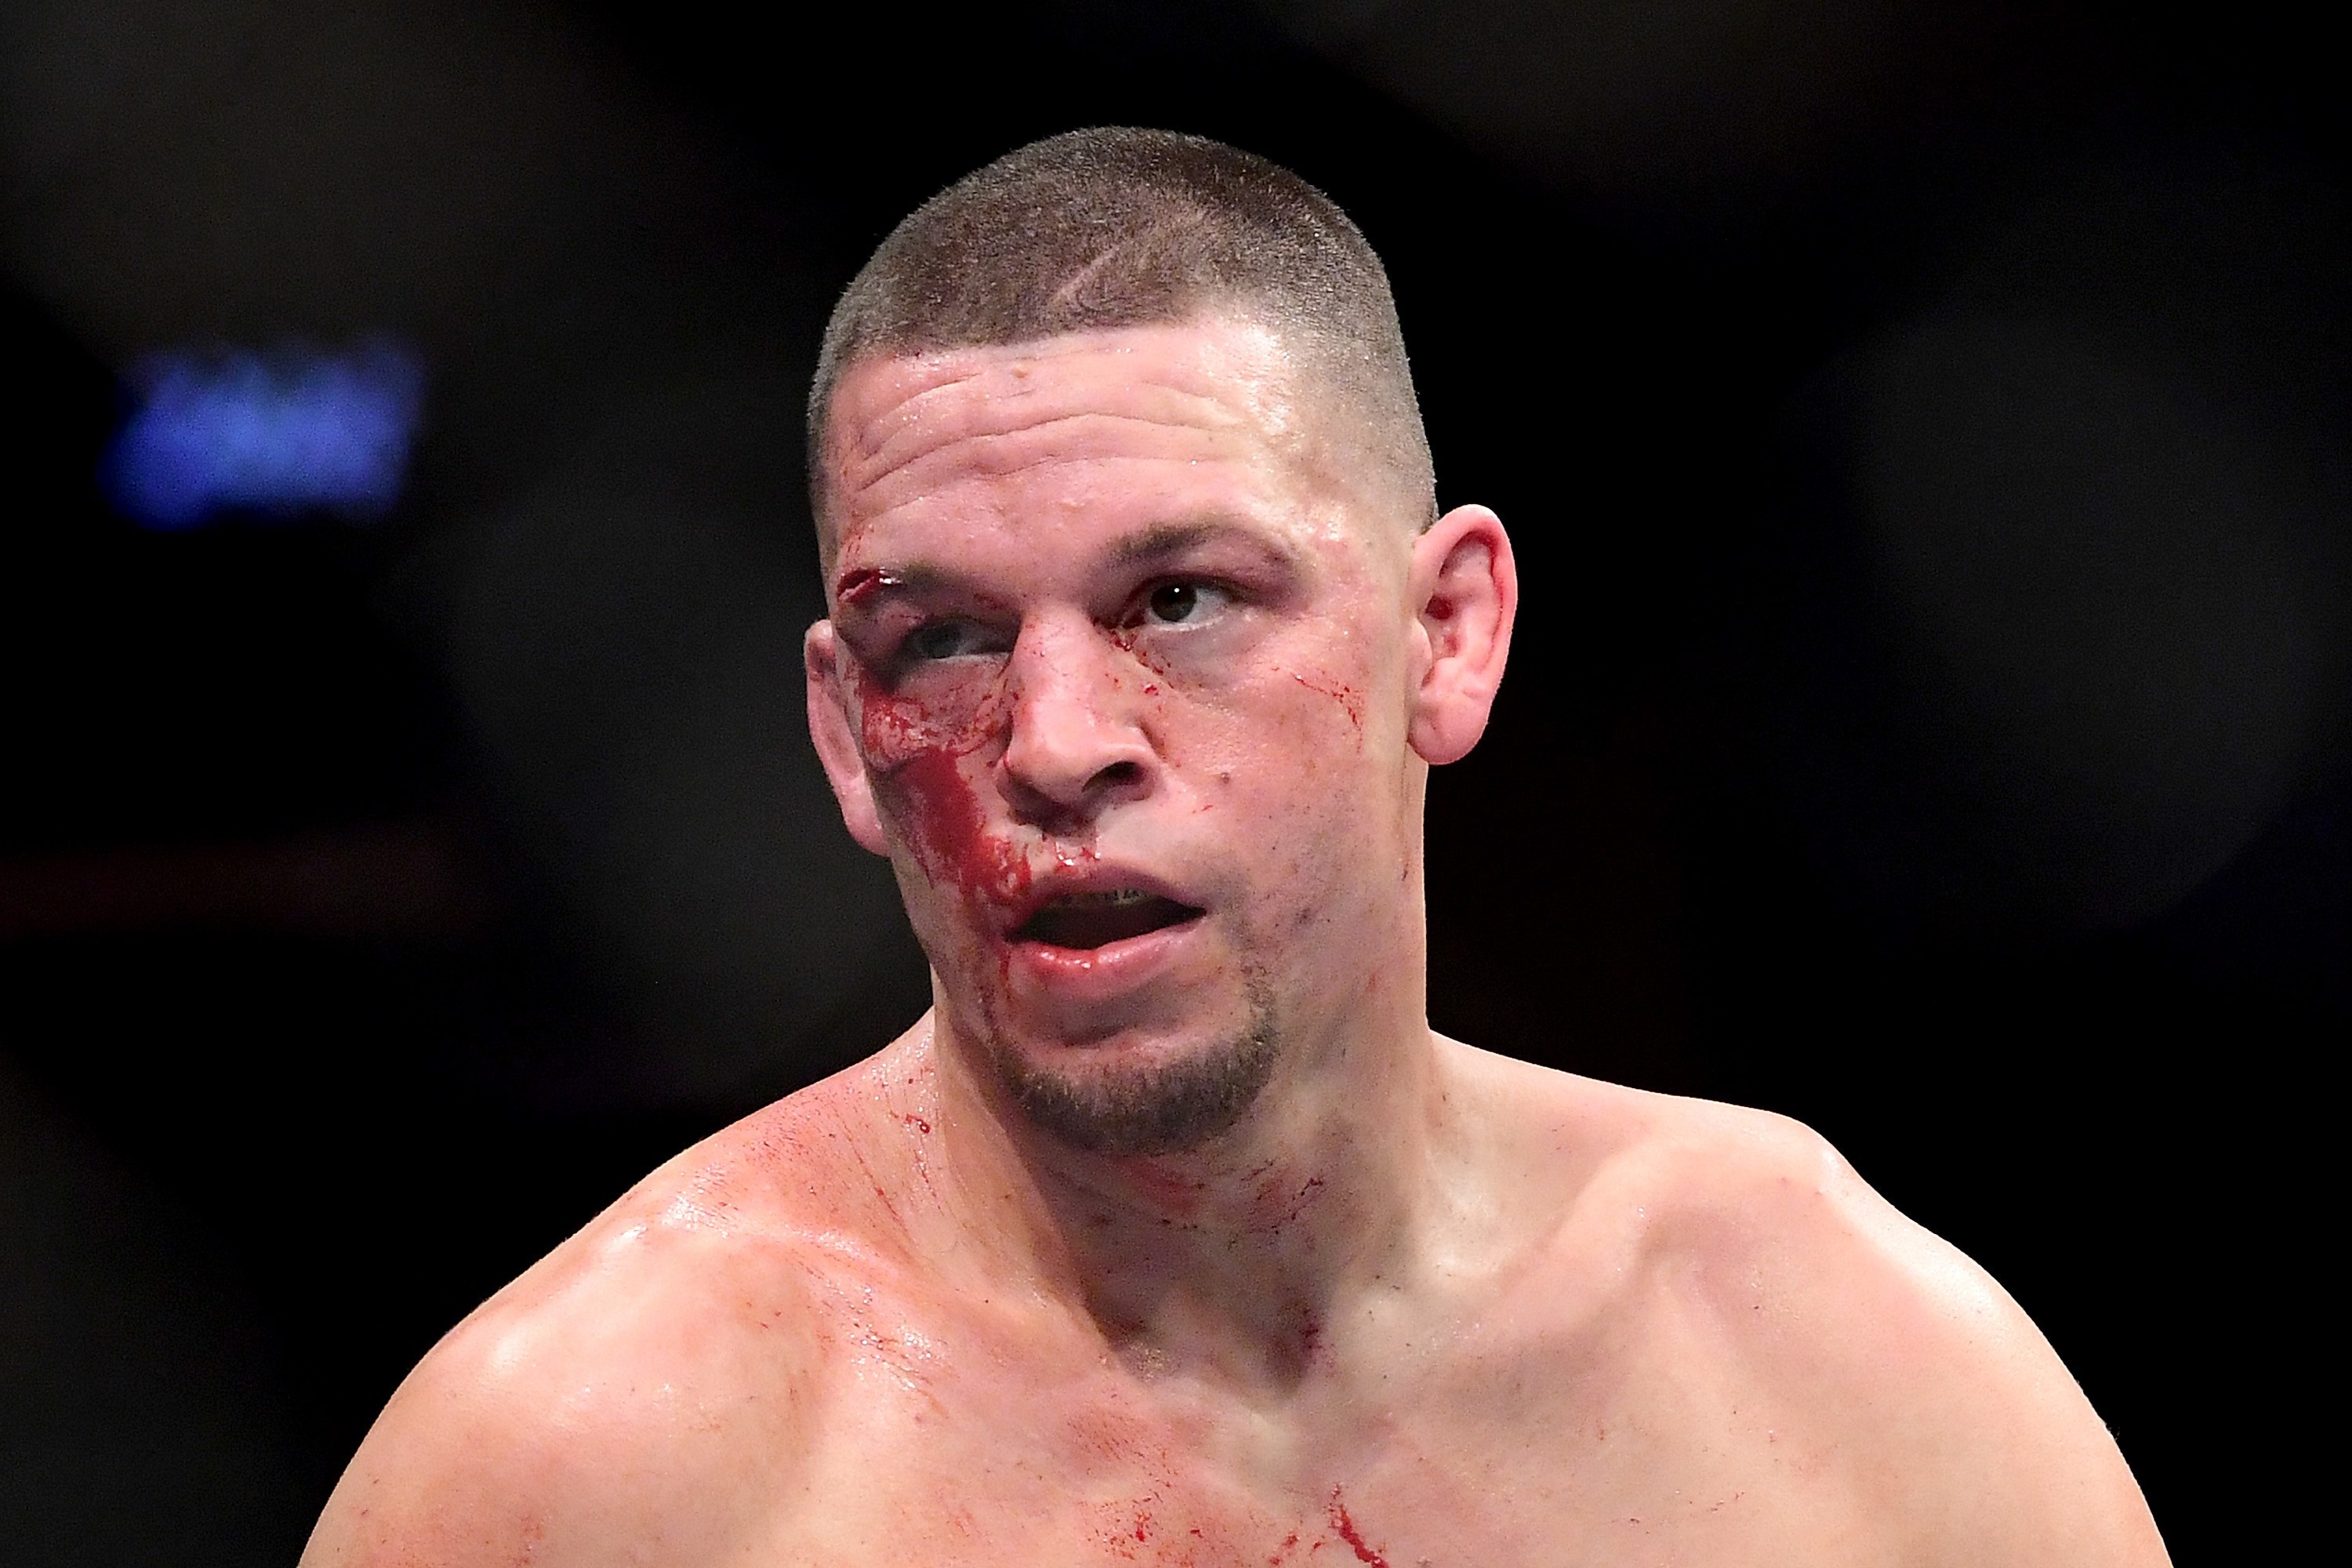 Nate Diaz wants to run it back with Jorge Masvidal after the doctor called their UFC 244 fight off. Photo: AFP